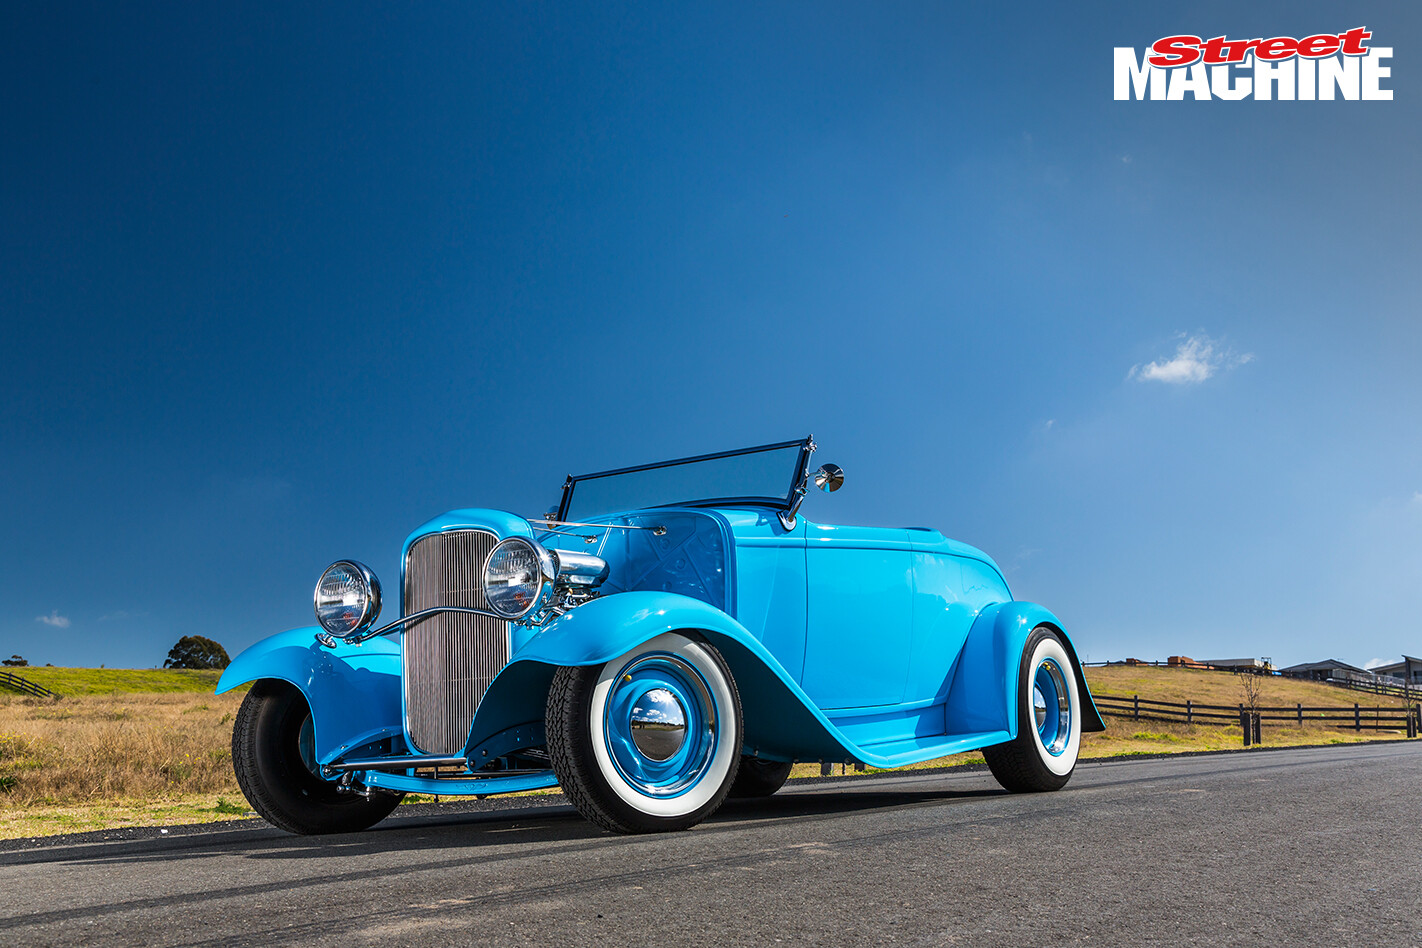 32 Ford Roadster Hot Rod